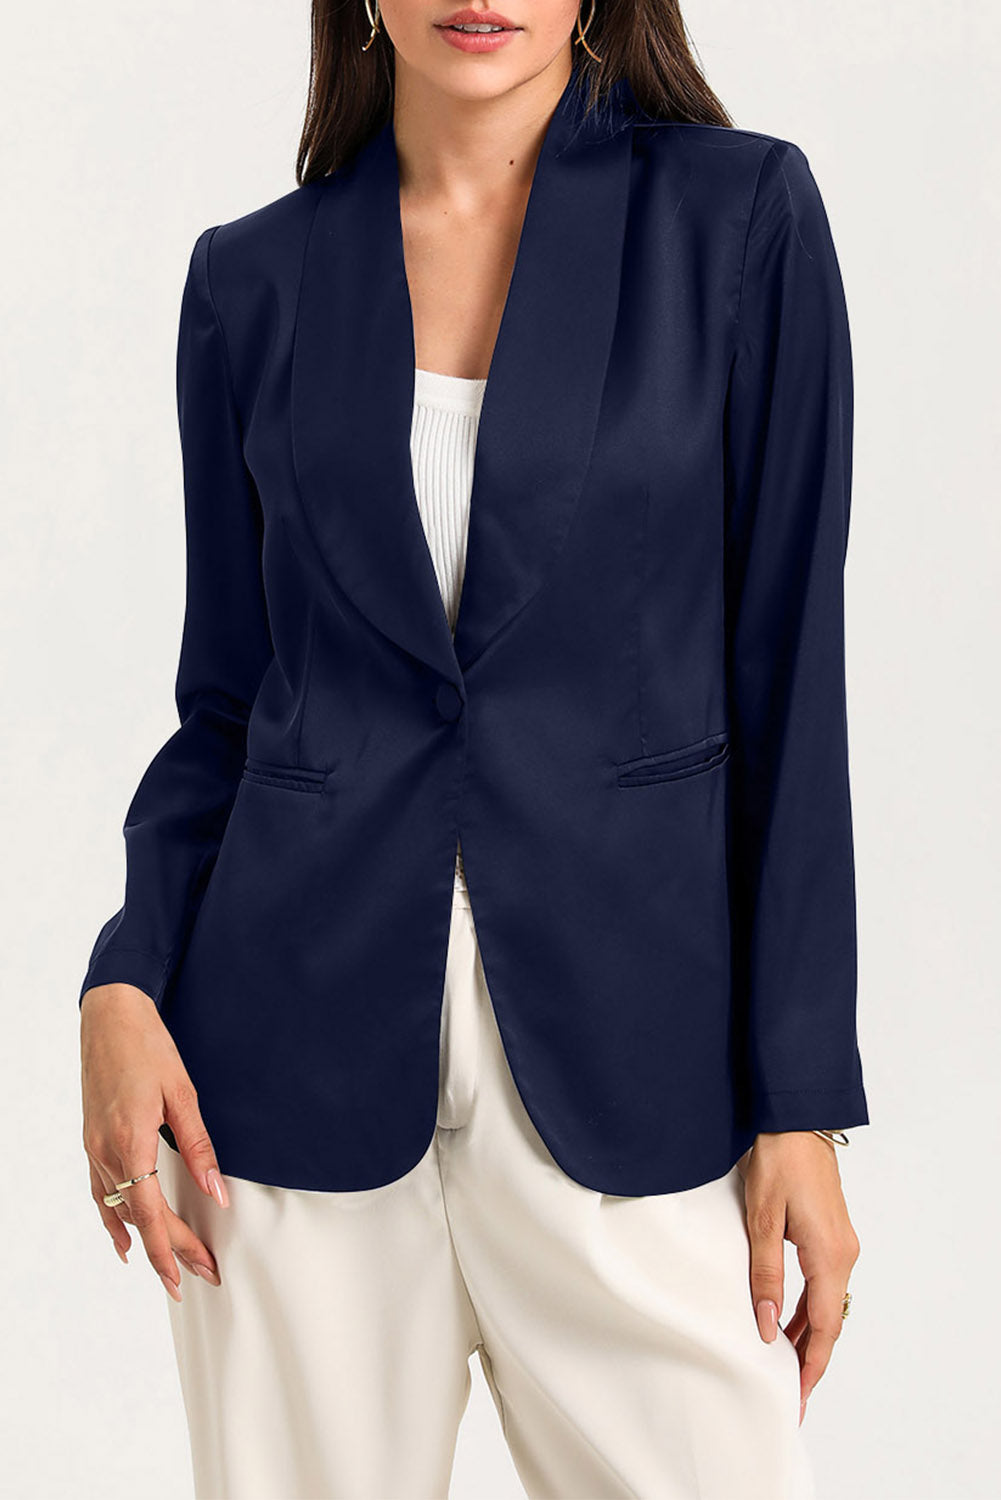 Blue Collared Neck Single Breasted Blazer with Pockets